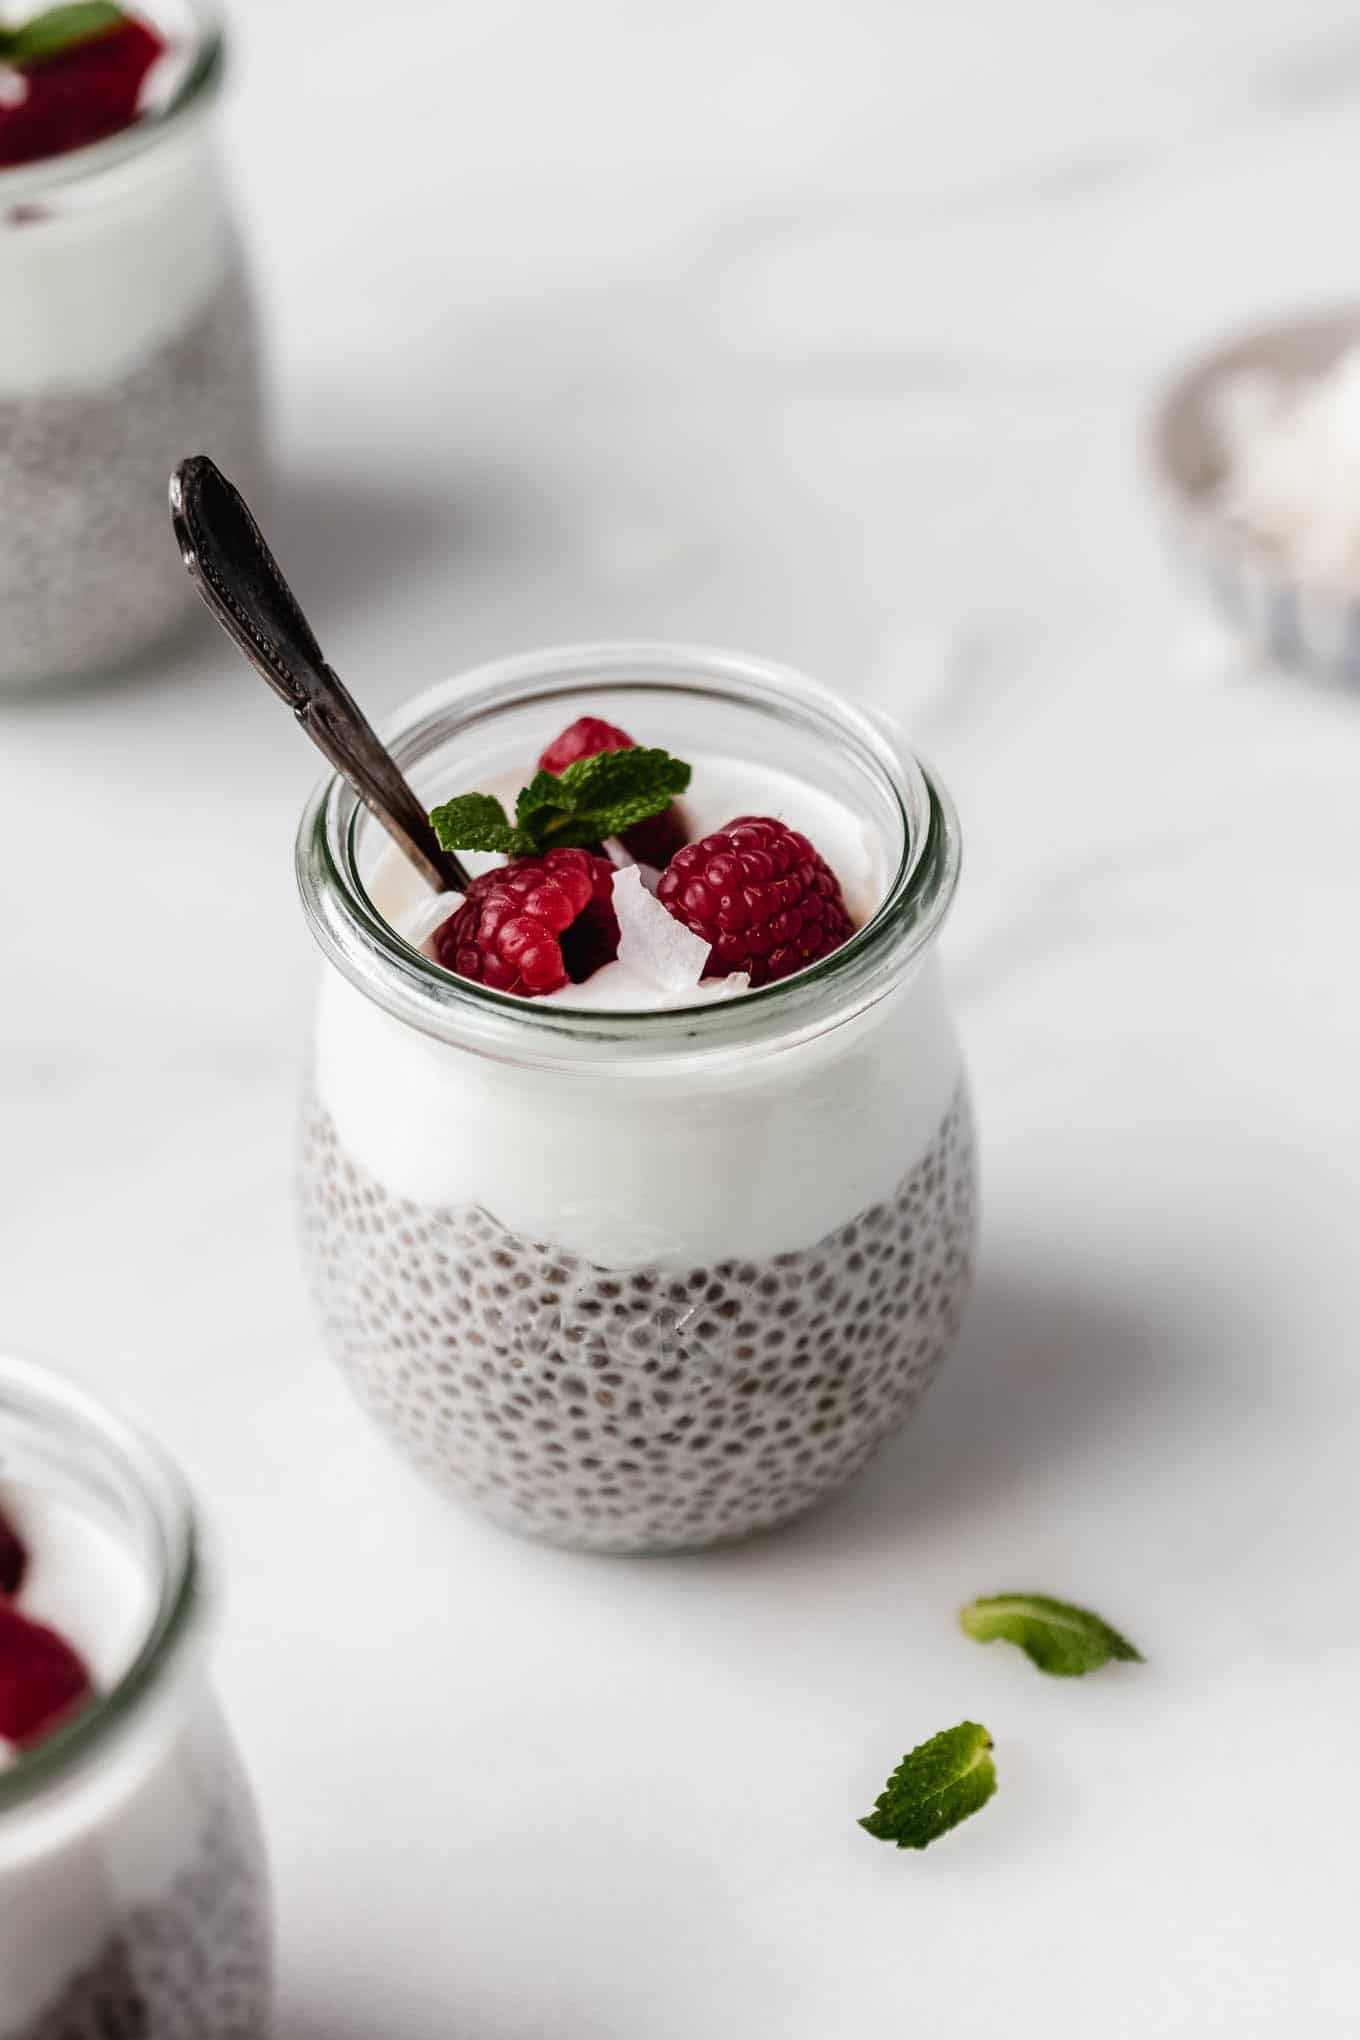 Low-carb chia seeds